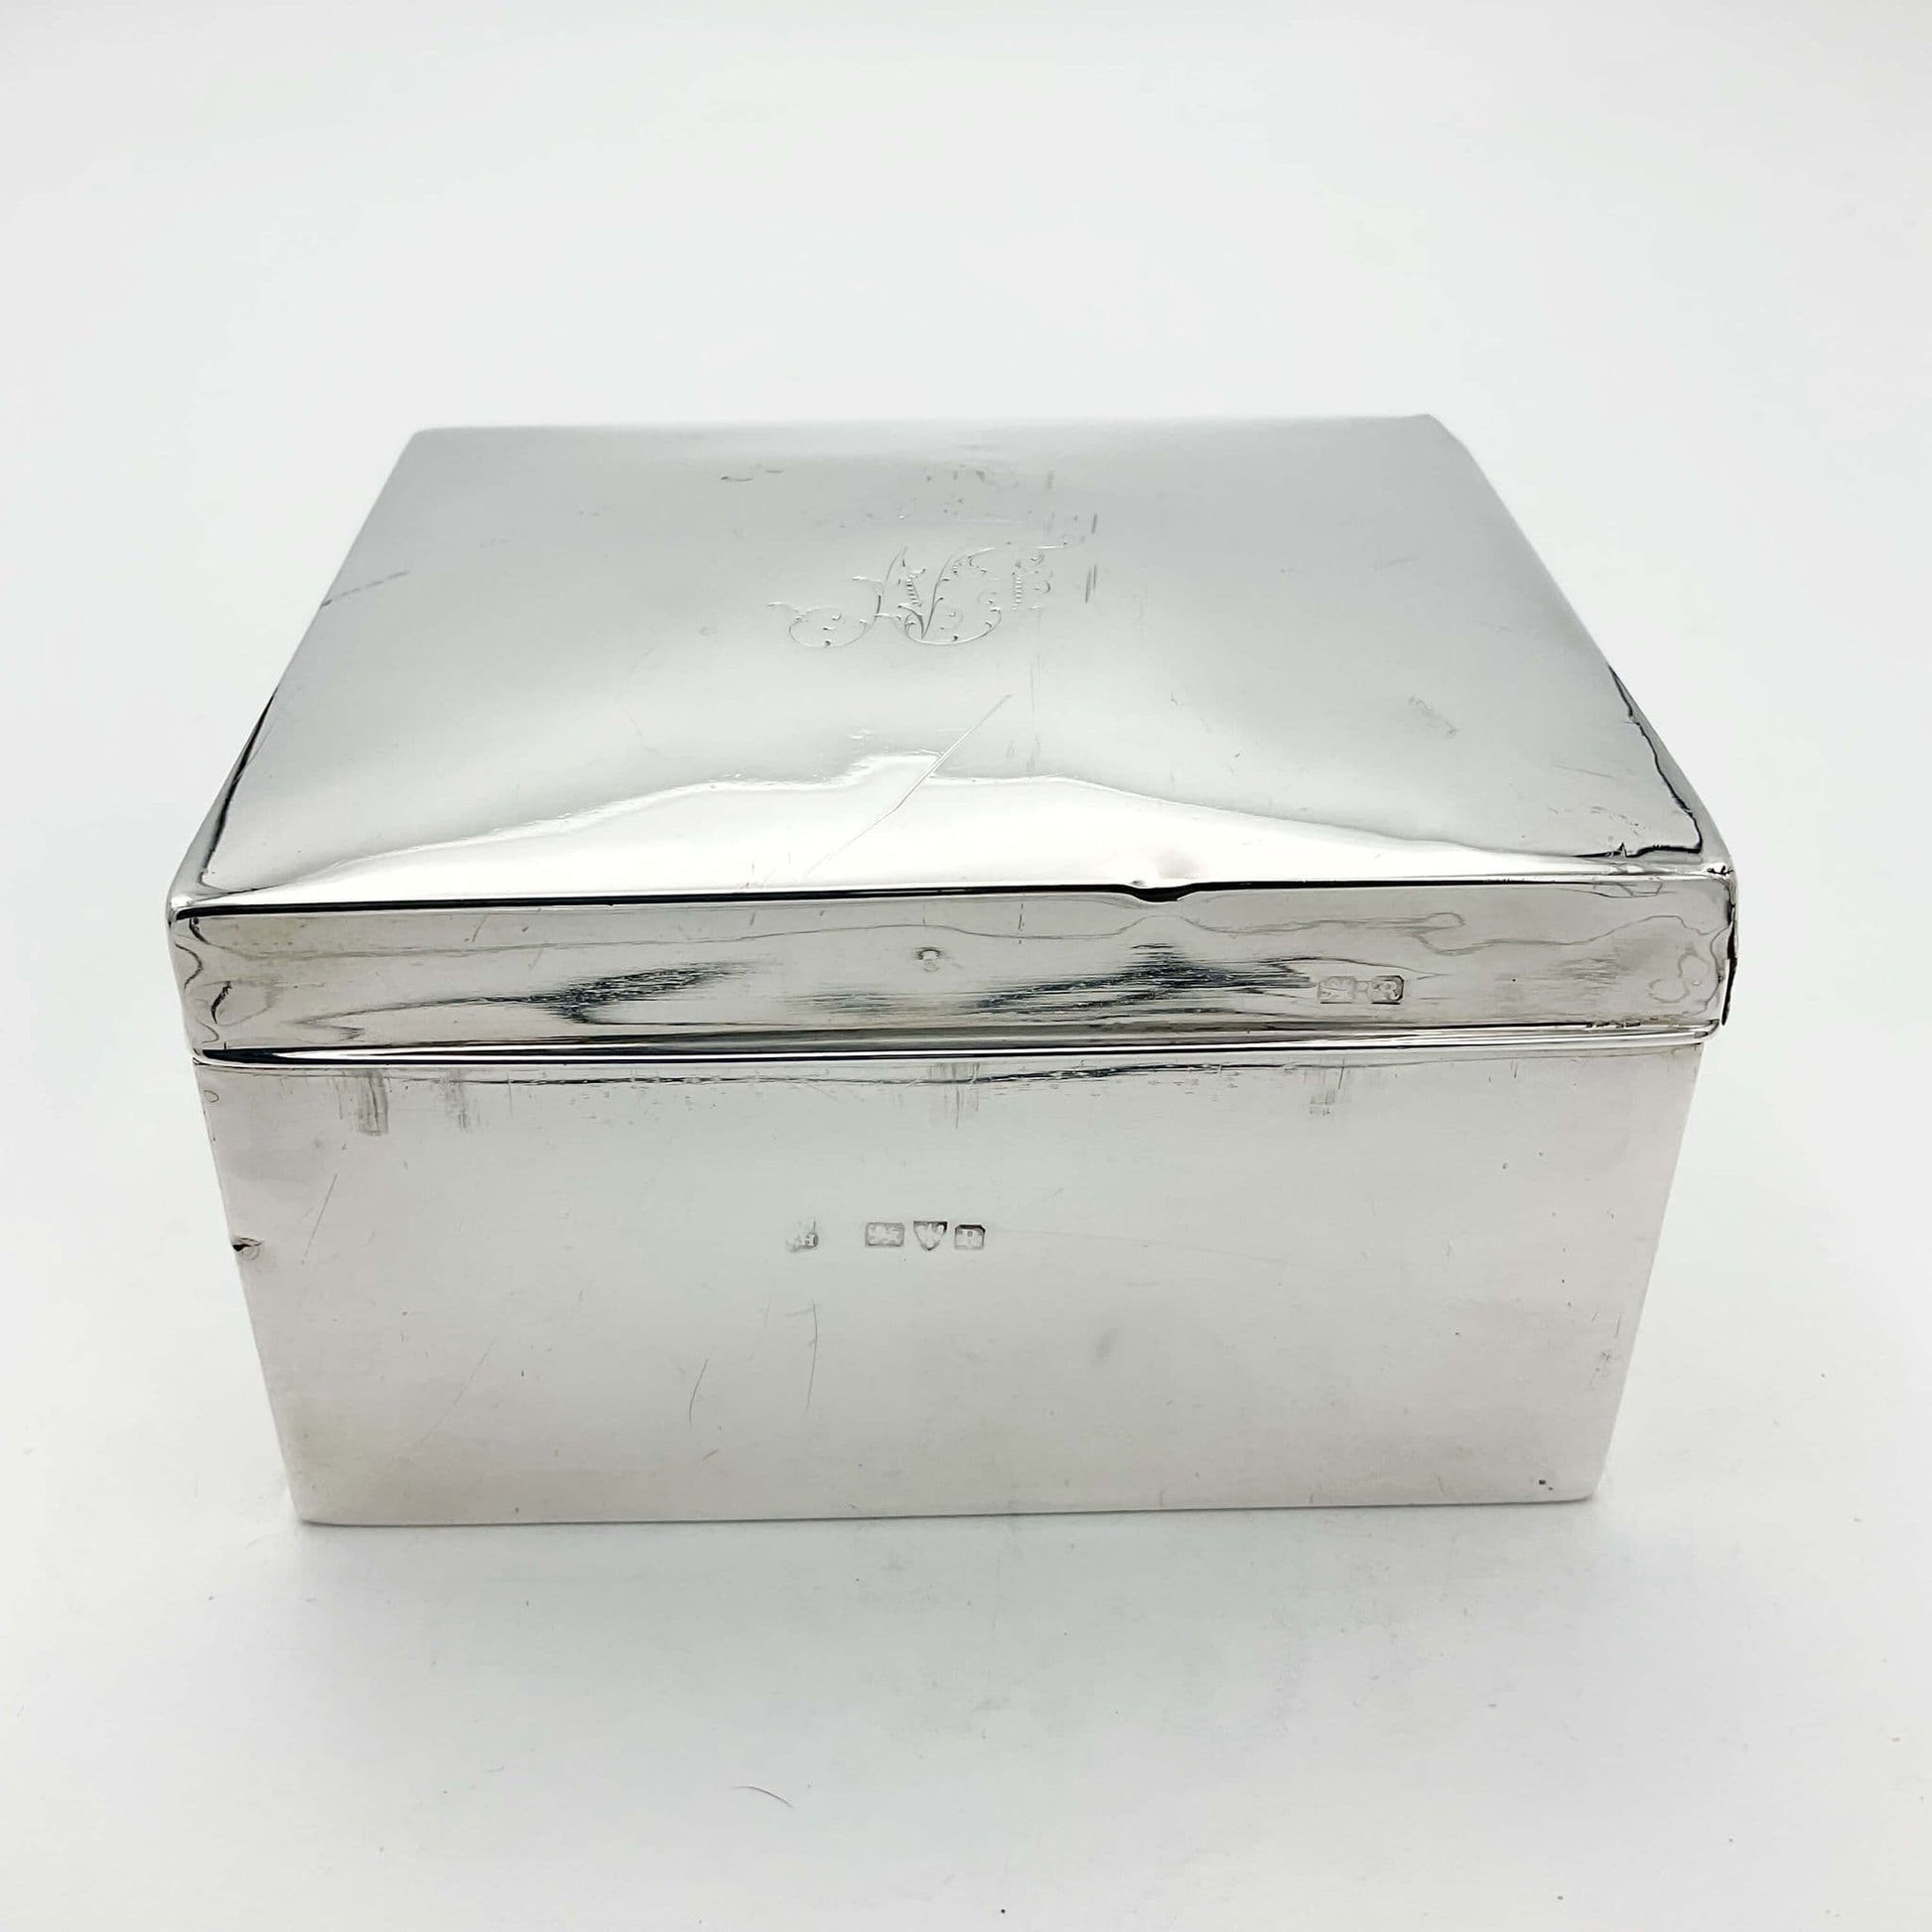 Antique 1900 silver cigarette box with hallmarks at the side on a white background